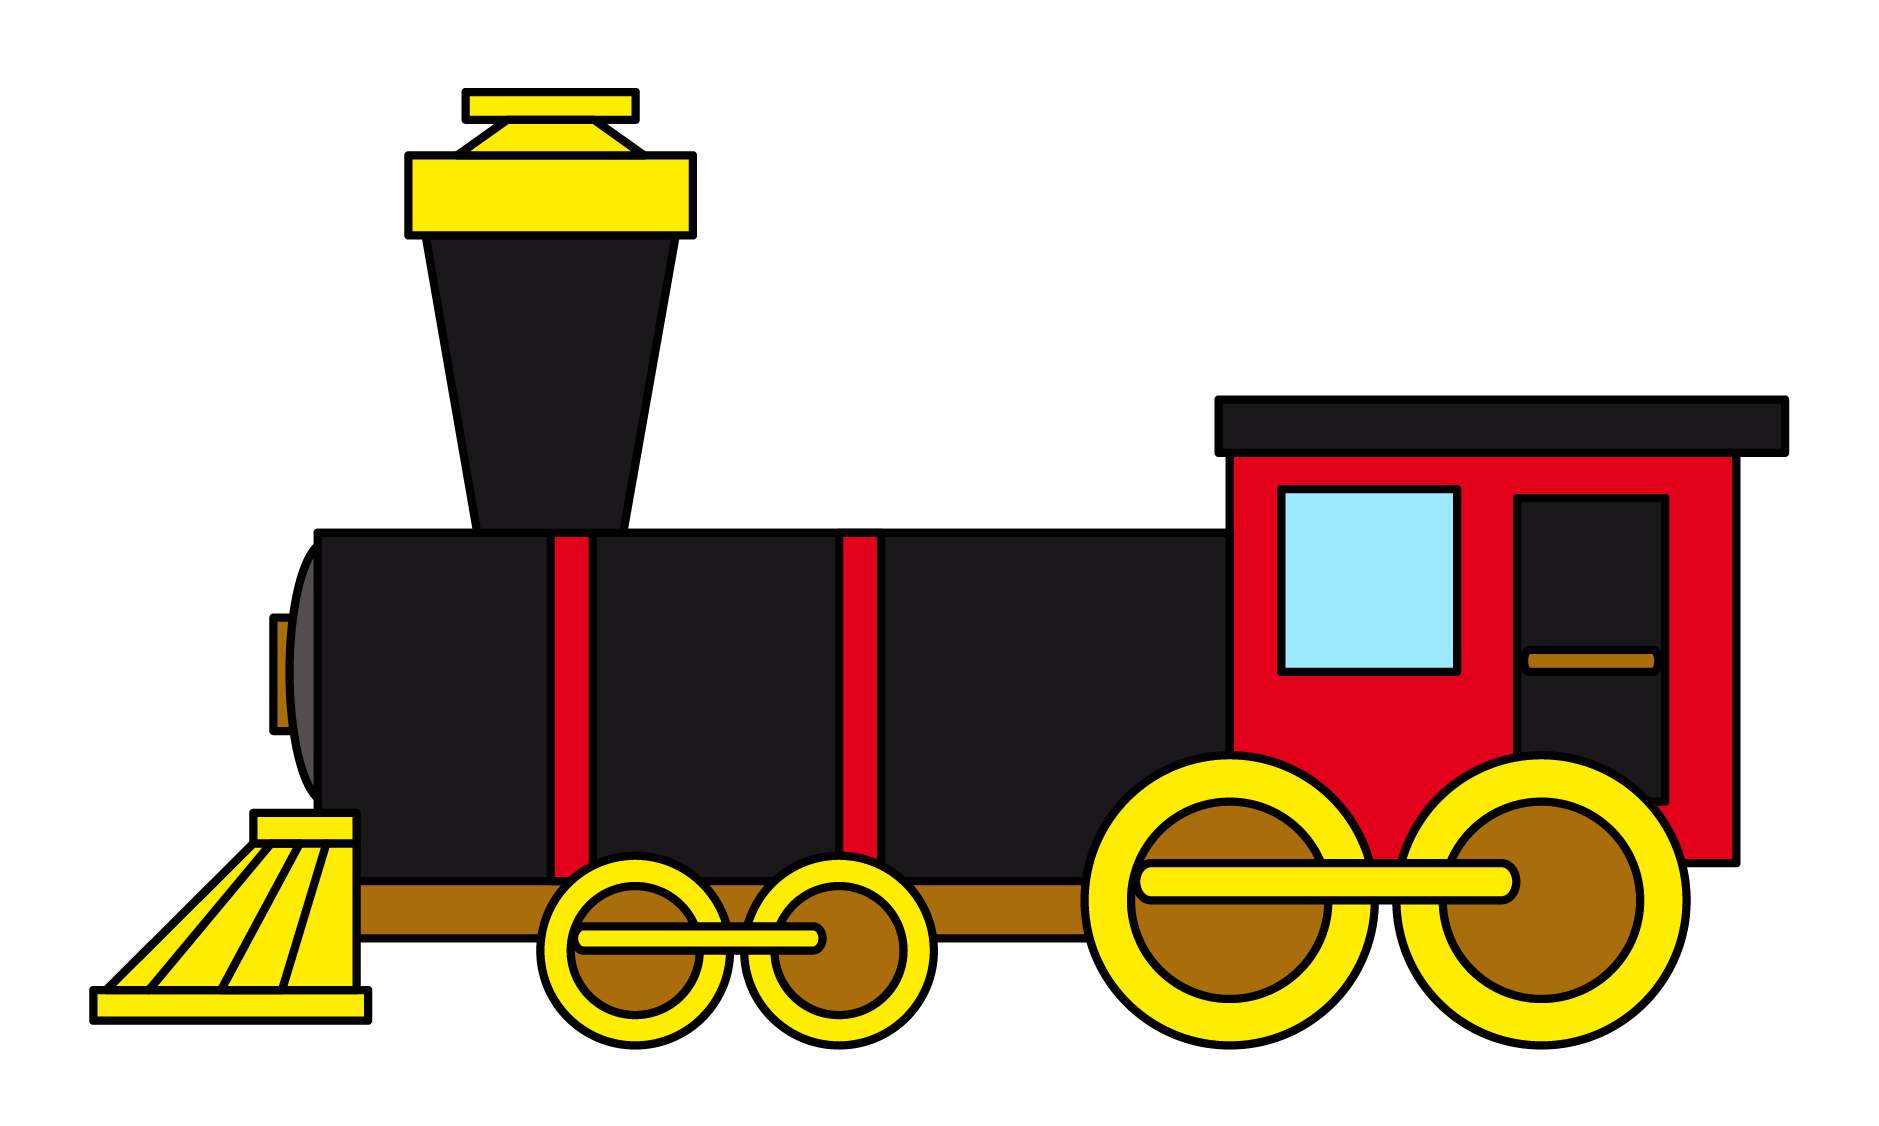 This cartoon locomotive clip art is free for personal or commercial use. We appreciate a link back to this webpage if you plan on using this clip art online ...